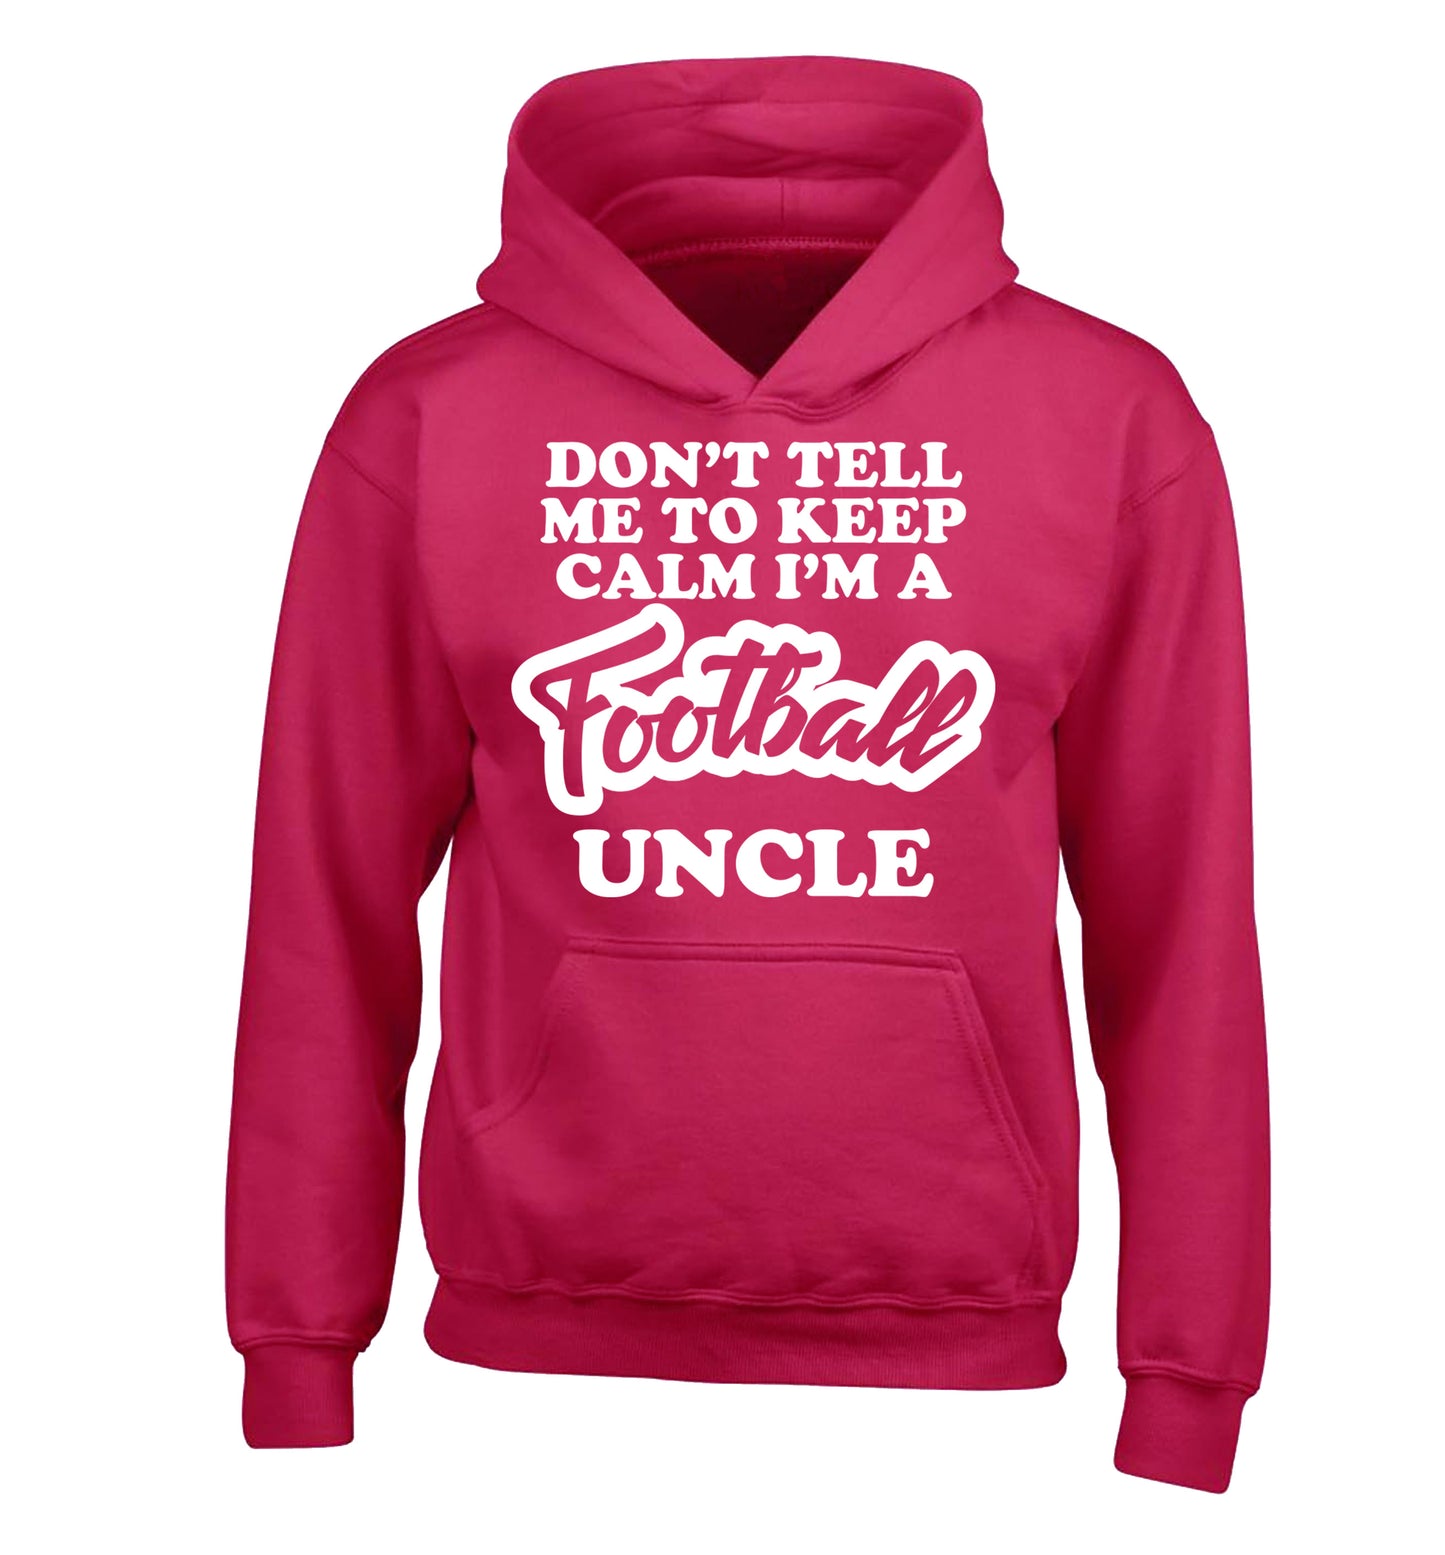 Worlds most amazing football uncle children's pink hoodie 12-14 Years